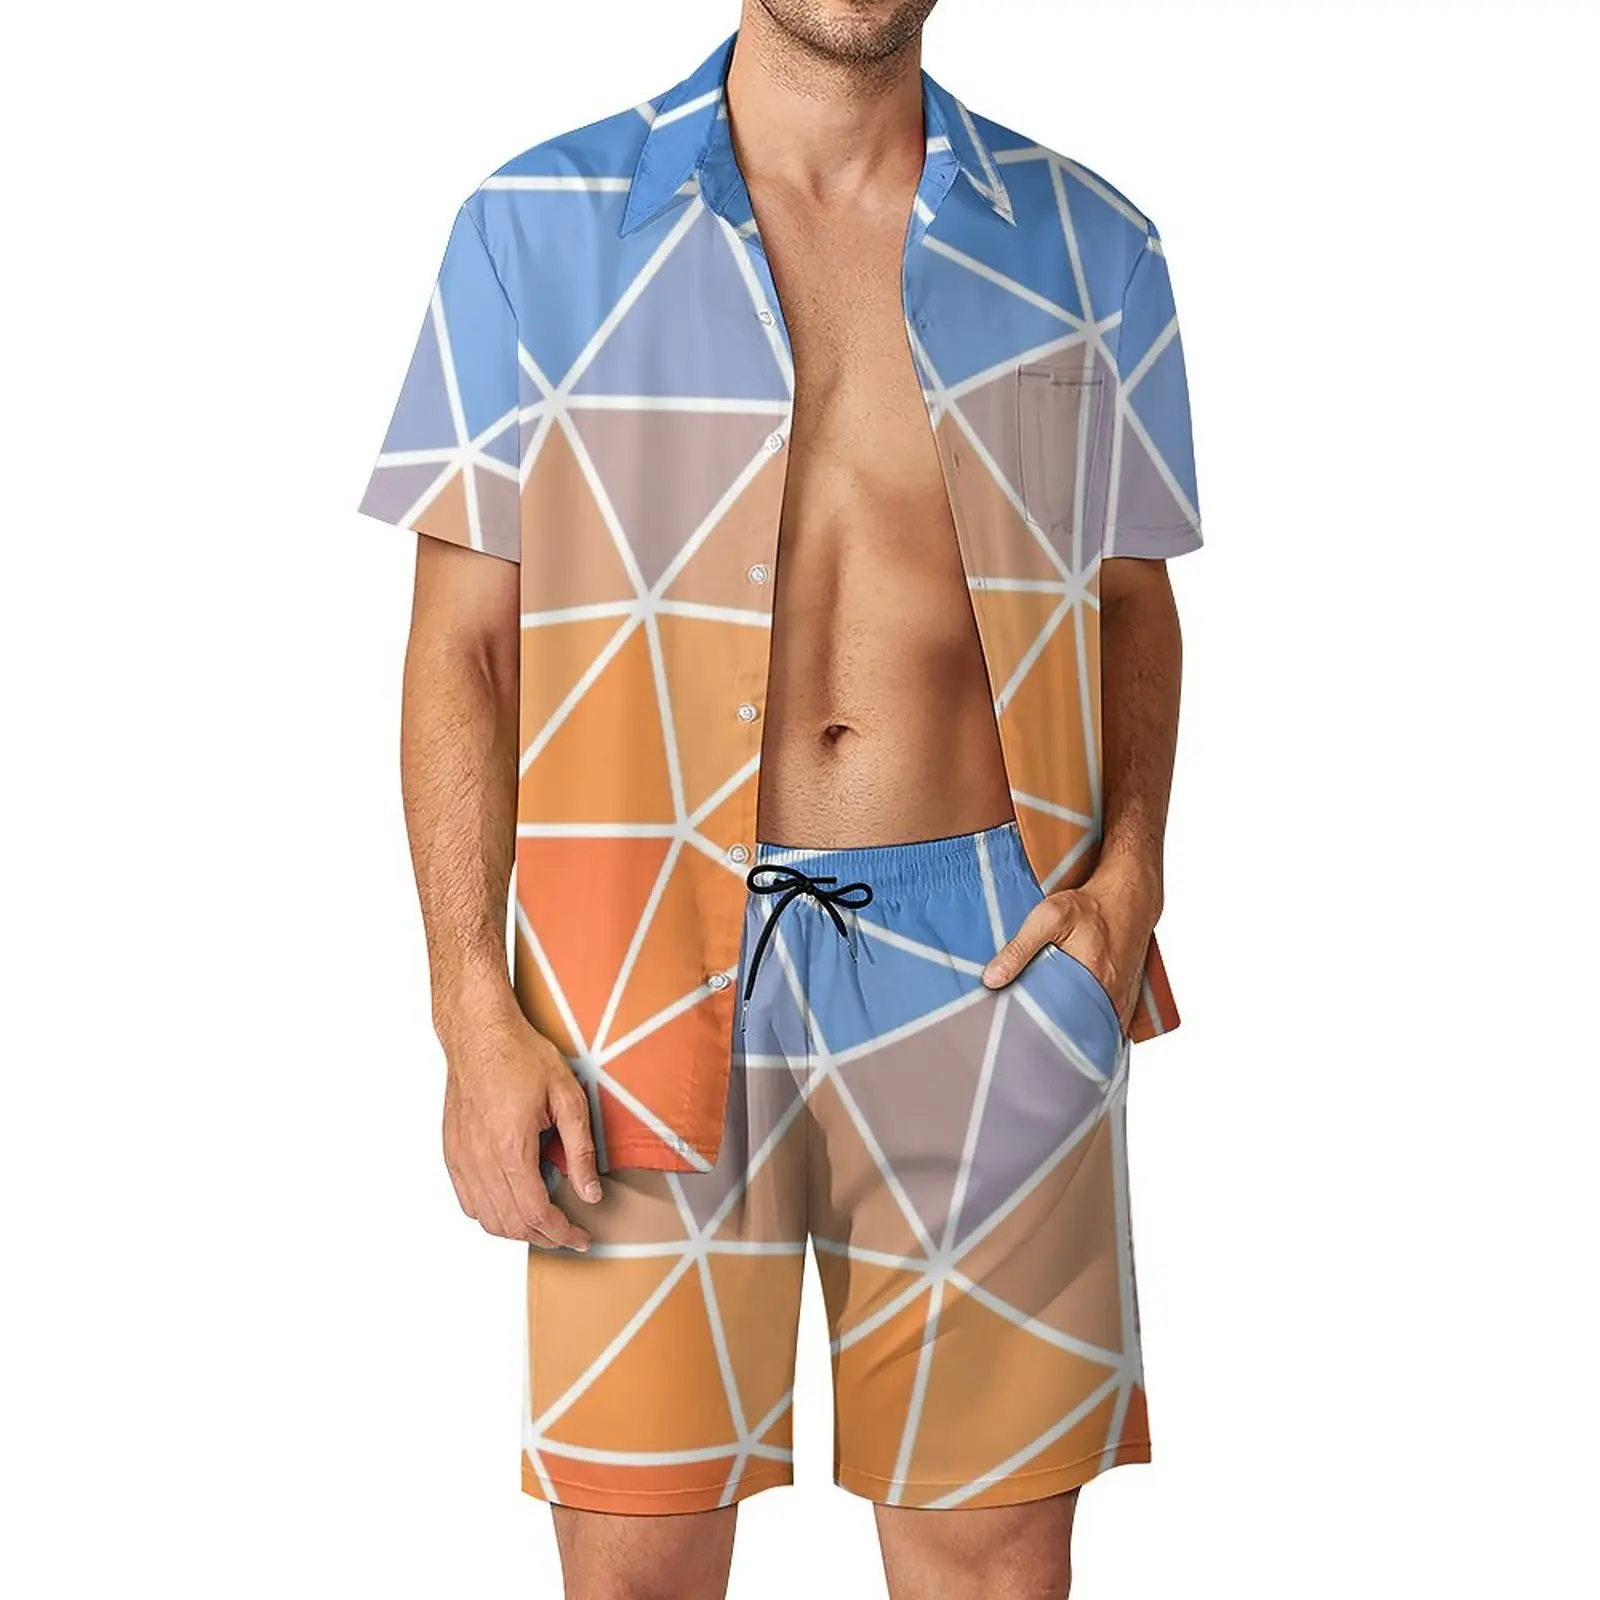 

Ombre Geo Print Men Sets Sunrise Fashion Casual Shirt Set Short-Sleeved Printed Shorts Summer Vacation Suit Plus Size 2XL 3XL